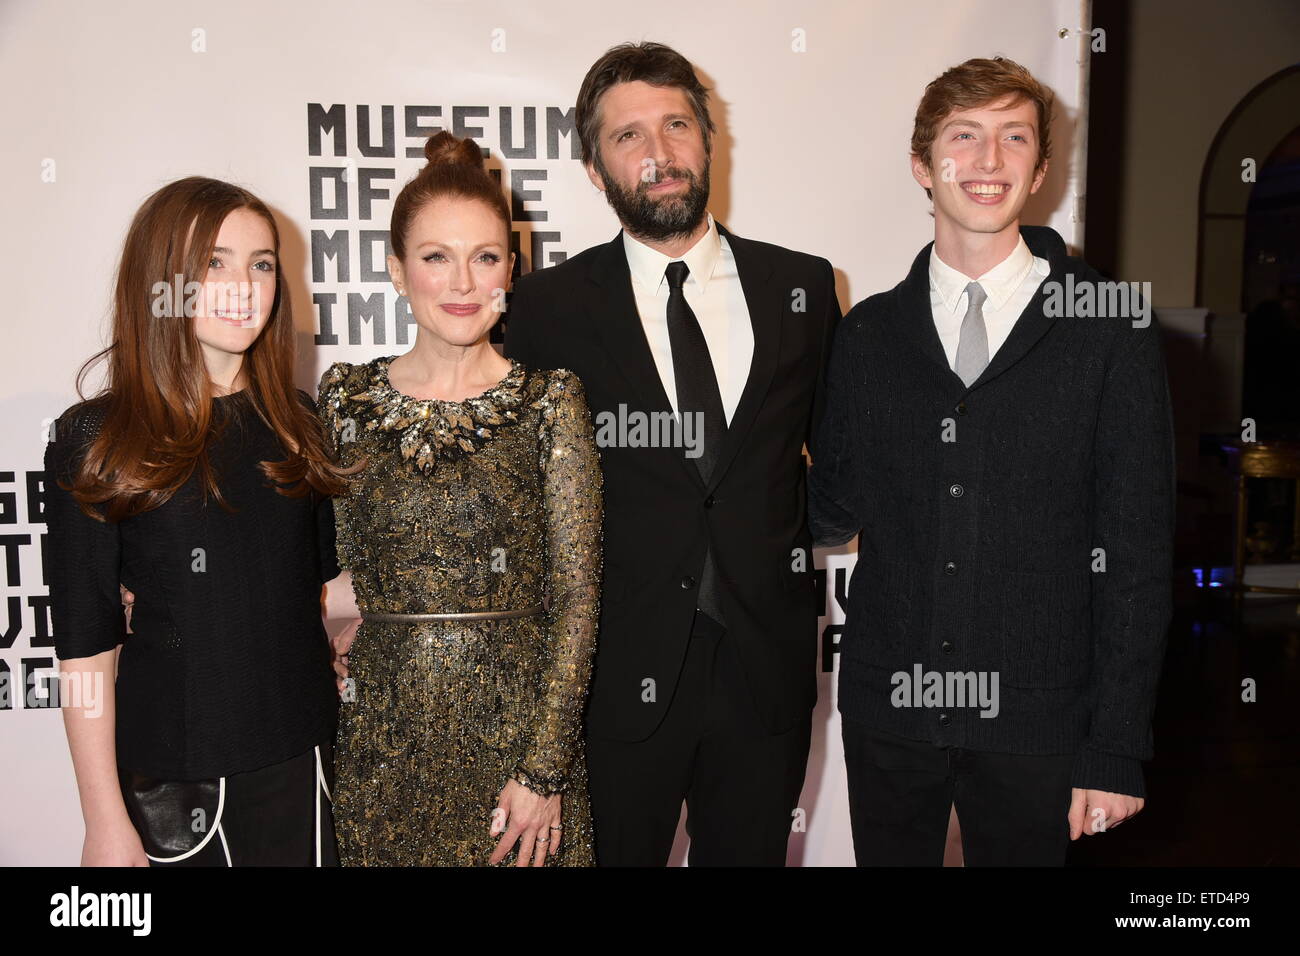 Museum Of The Moving Image Honors Julianne Moore - Red Carpet Arrivals  Featuring: Liv Freundlich, Julianne Moore, Bart Freundlich, Caleb Freundlich Where: New York City, New York, United States When: 20 Jan 2015 Credit: Rob Rich/WENN.com Stock Photo